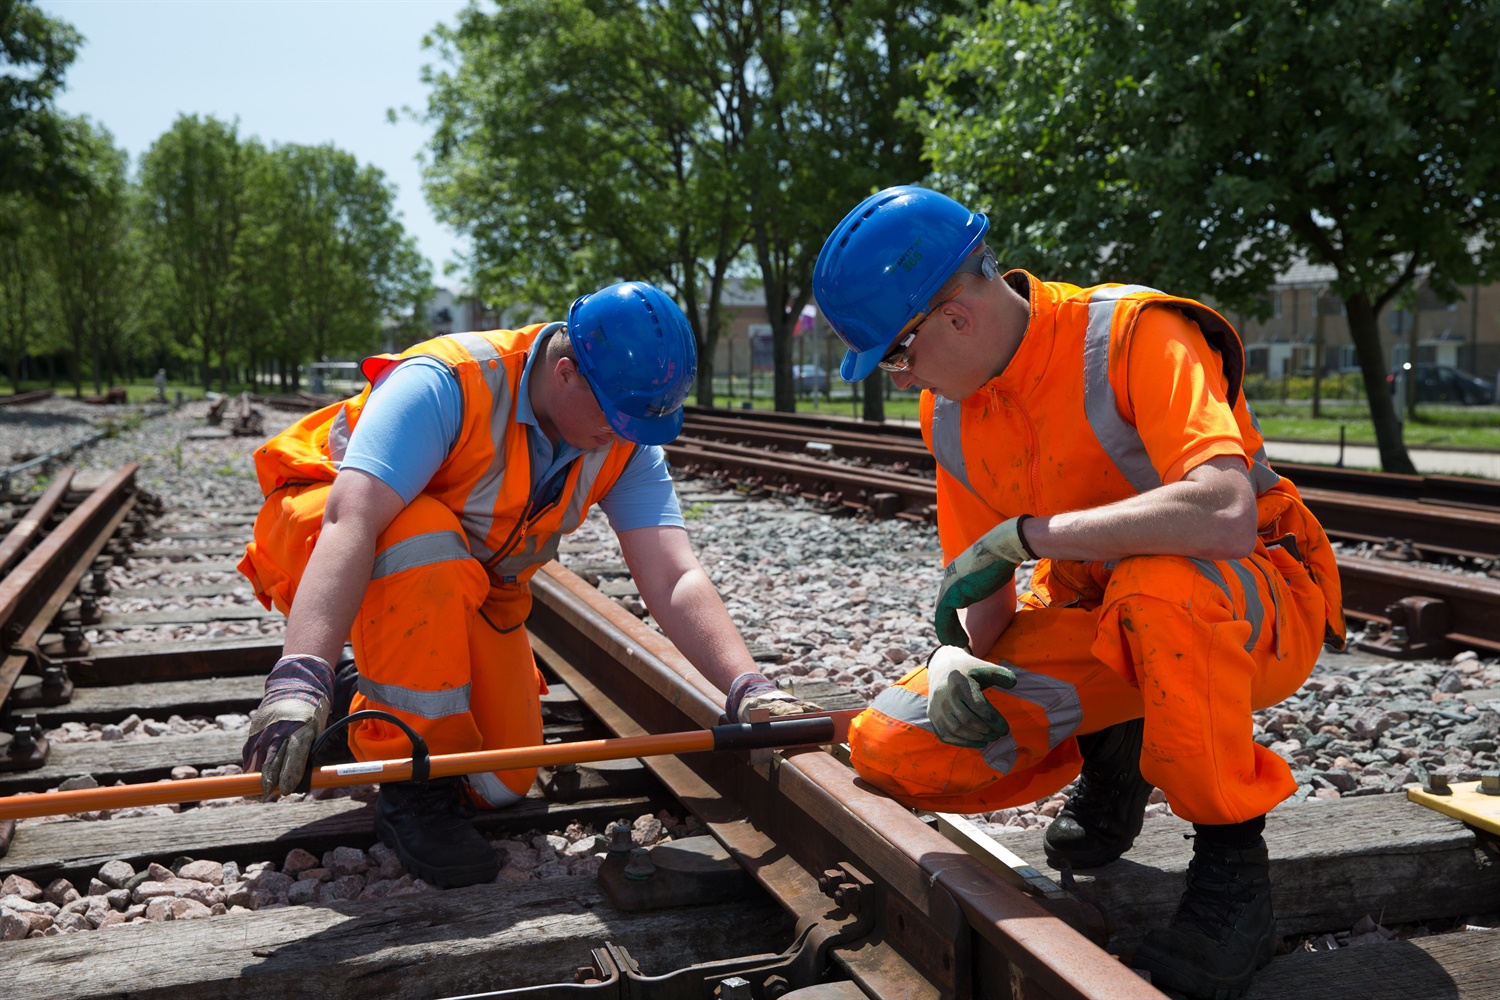 NR to offer new apprenticeships in cyber security and digital railway